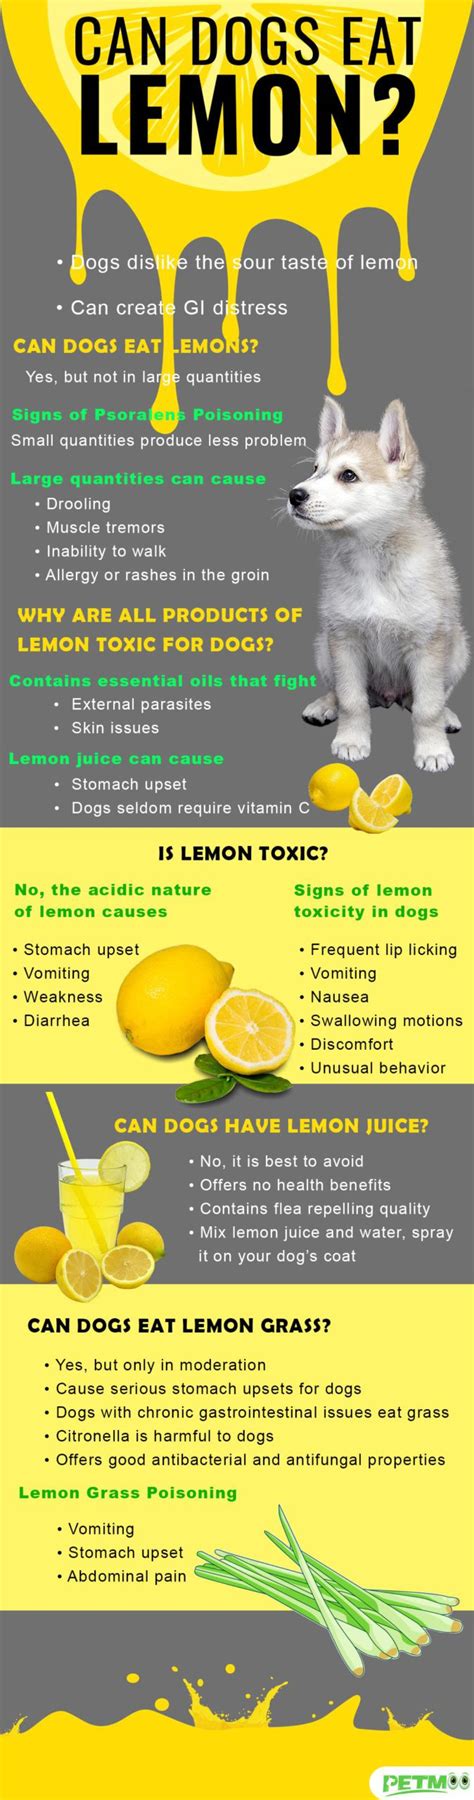 If you are unsure whether a plant or seed is safe for your dog, call the Pet Poison Helpline at (855) 764-7661 or the ASPCA Animal Poison Control Center at (888) 426-4435. The helpful staff will .... 